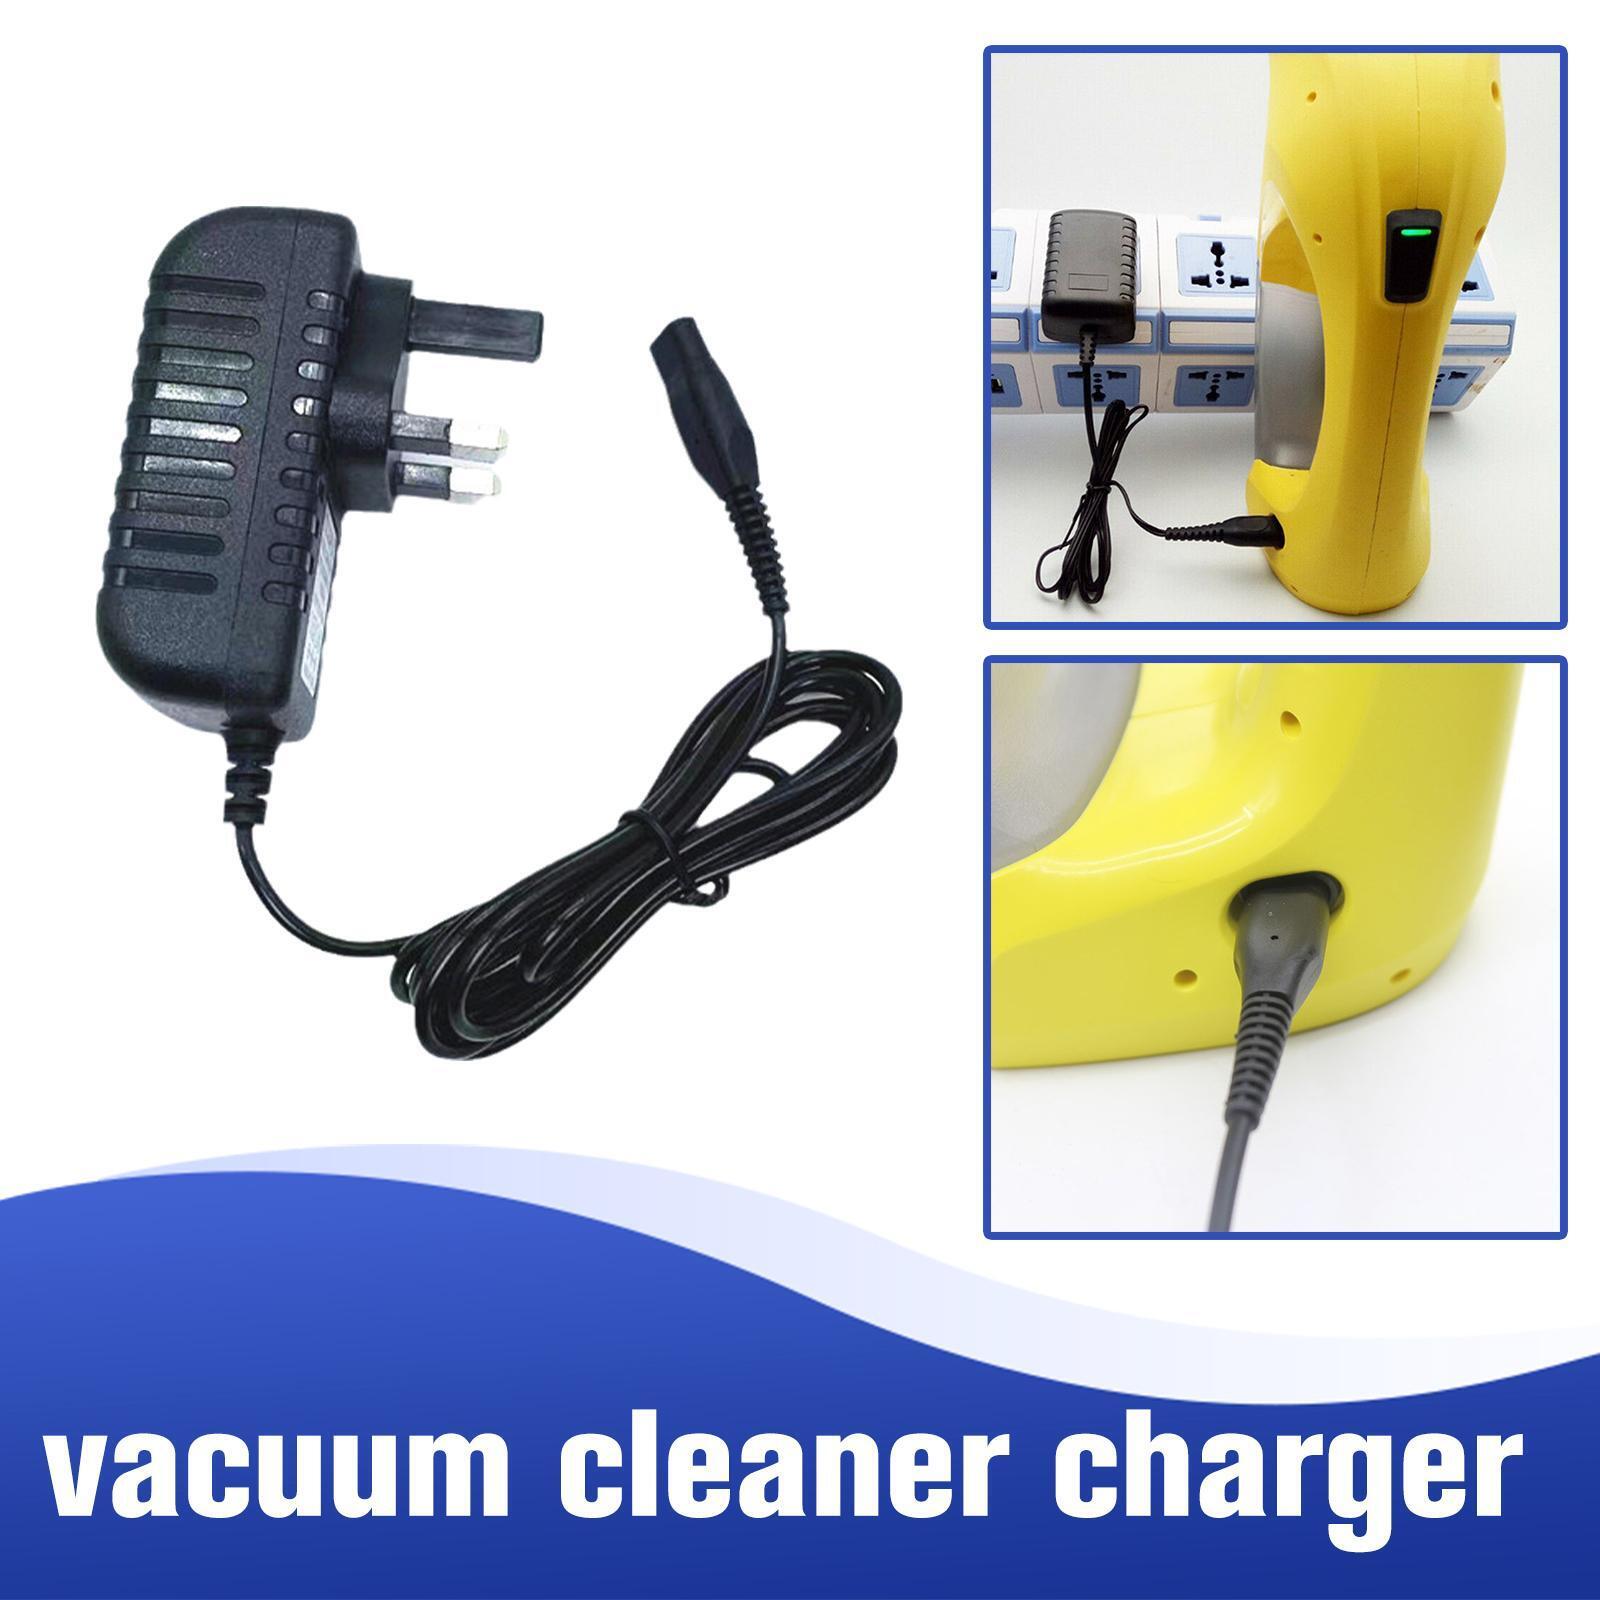 UK Plug Window Vac Vacuum Battery Charger Karcher WV2 50 Power 70 75 60 C1Z6 UK Plug Window Vac Vacuum Battery Charger